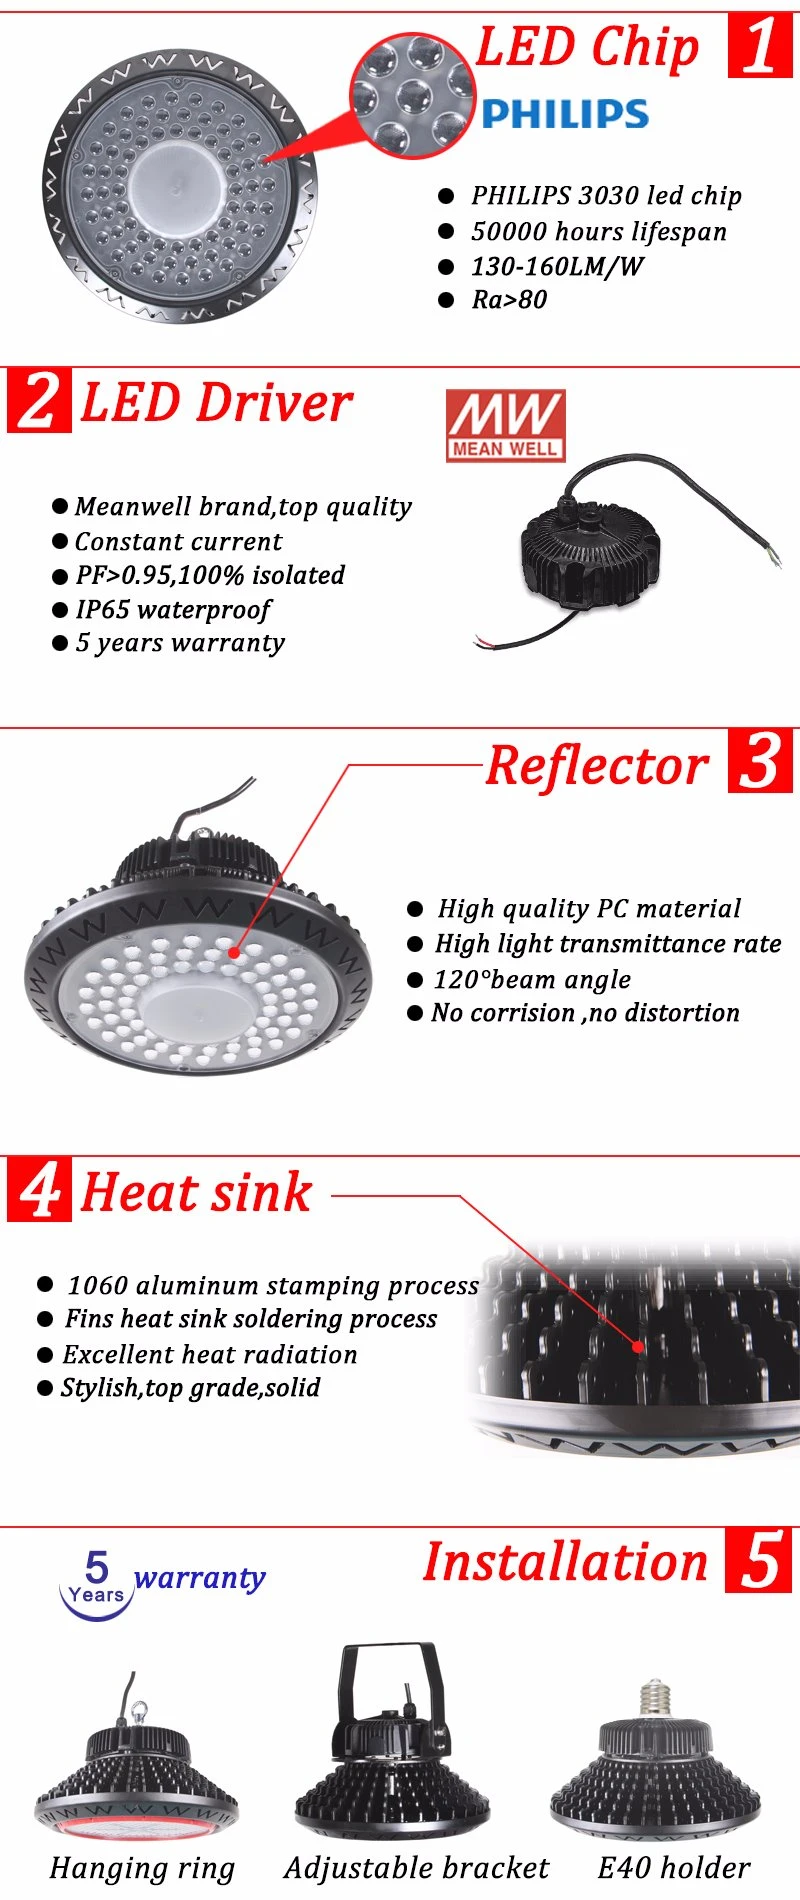 High Power Industrial LED Explosion Proof High Bay Light with 5 Years Warranty